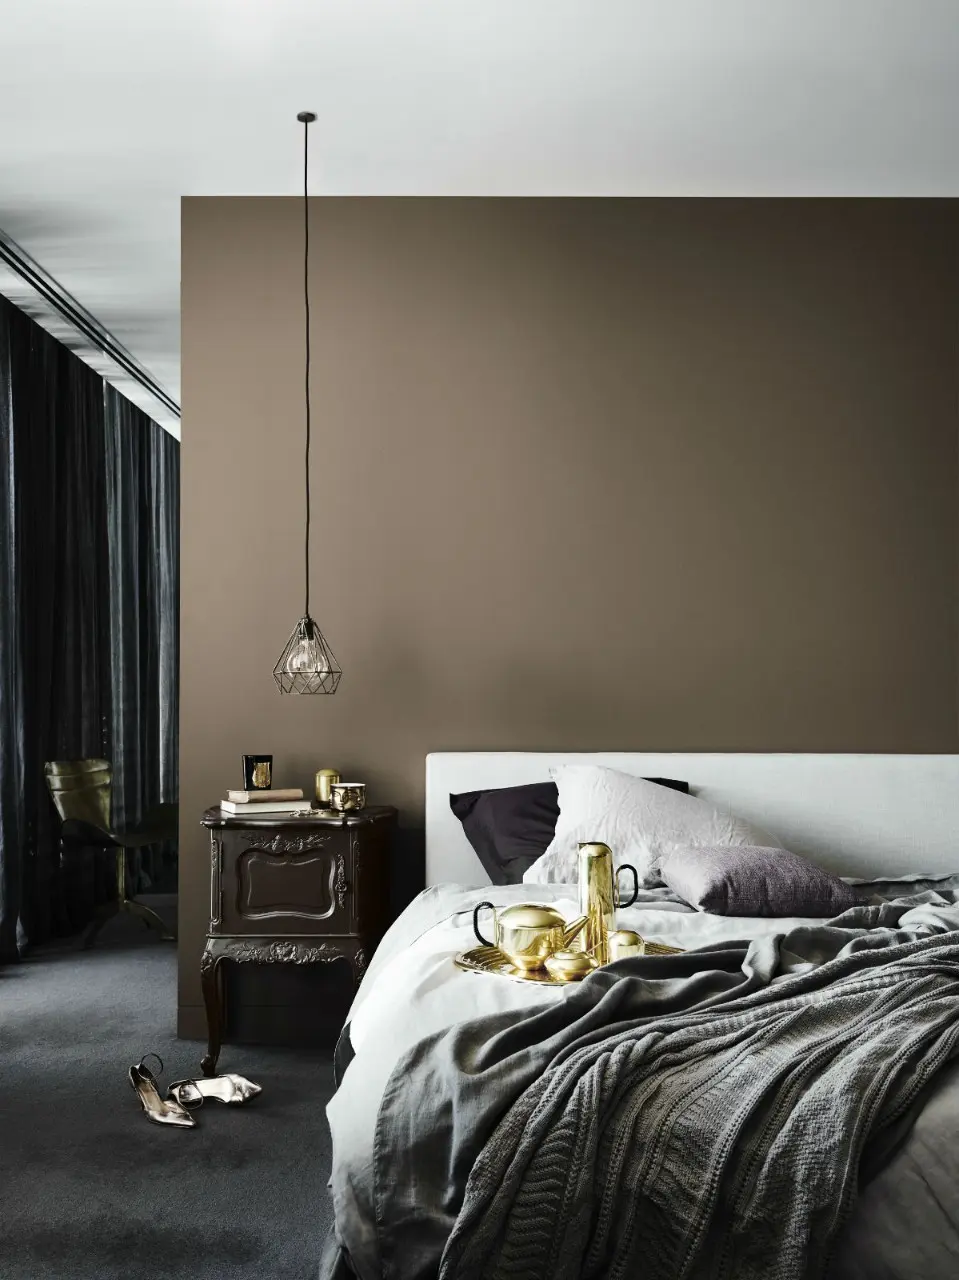 Bedroom with brown wall and hanging pendant light